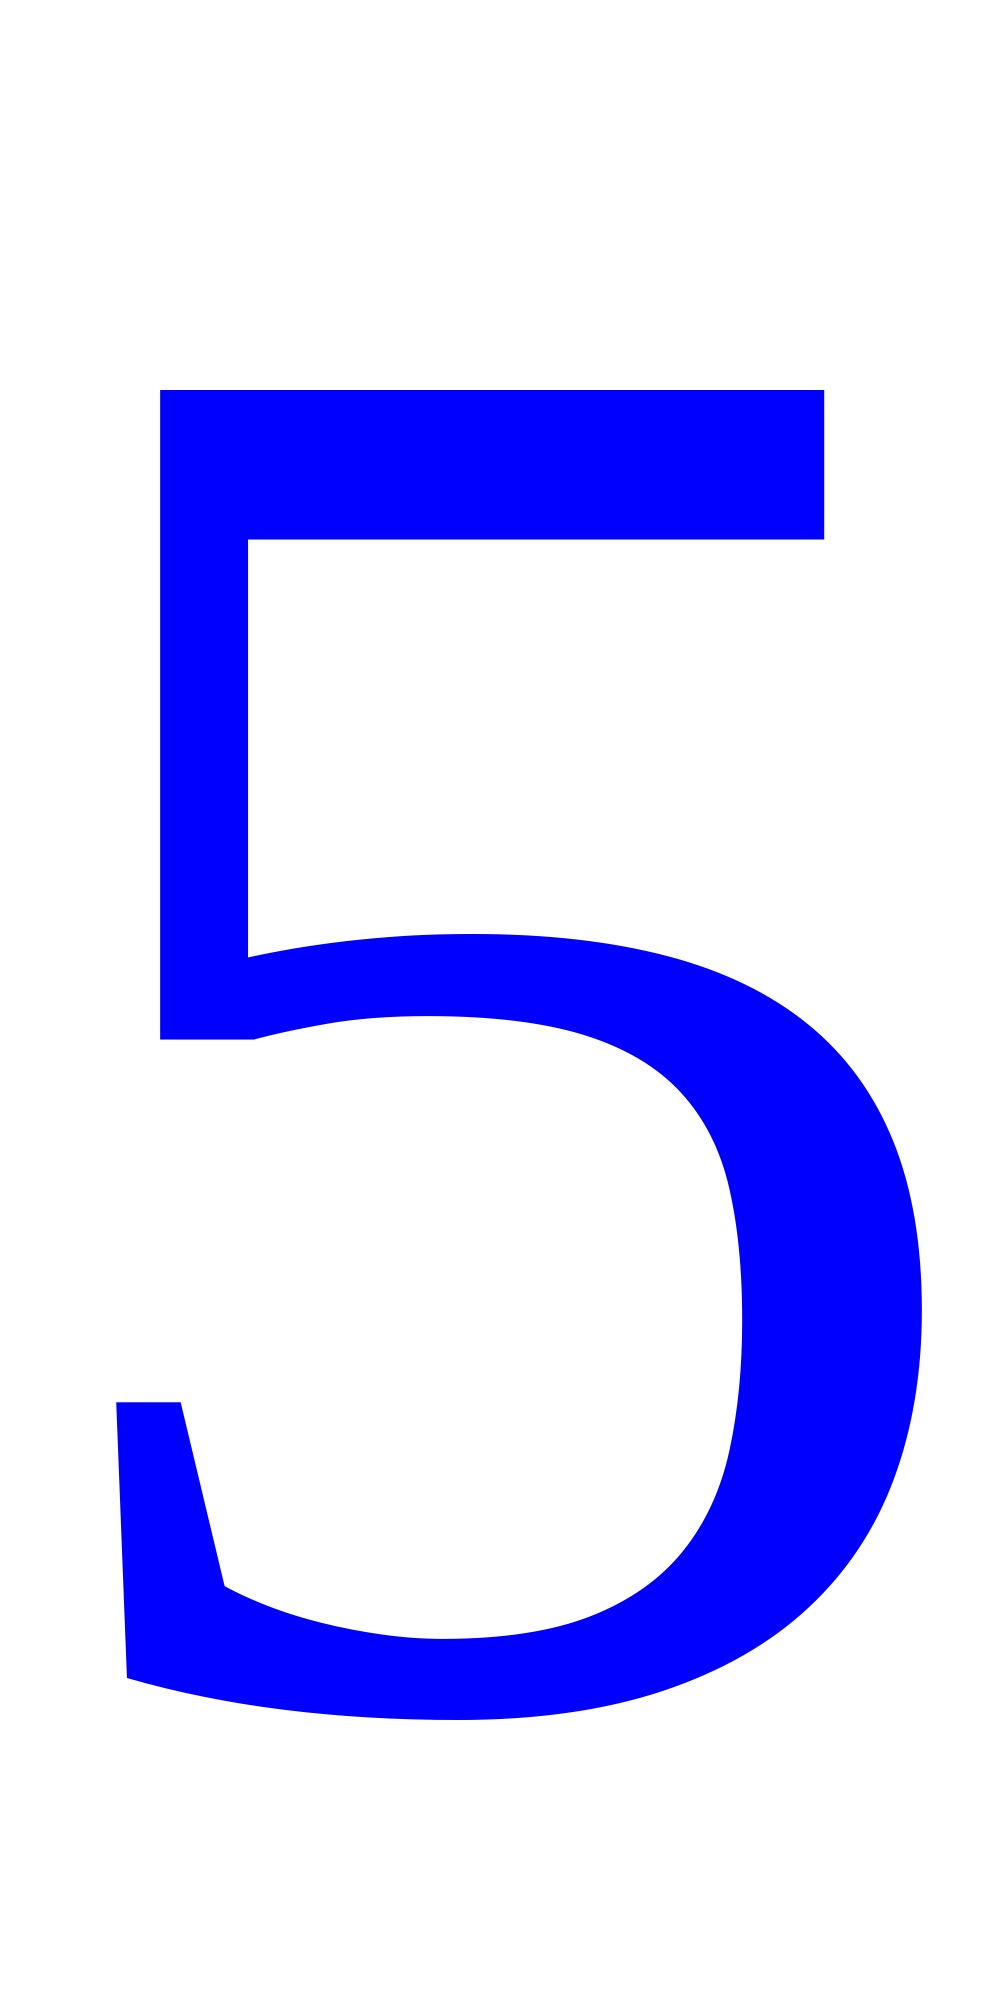 A blue numeral 5 on a white background